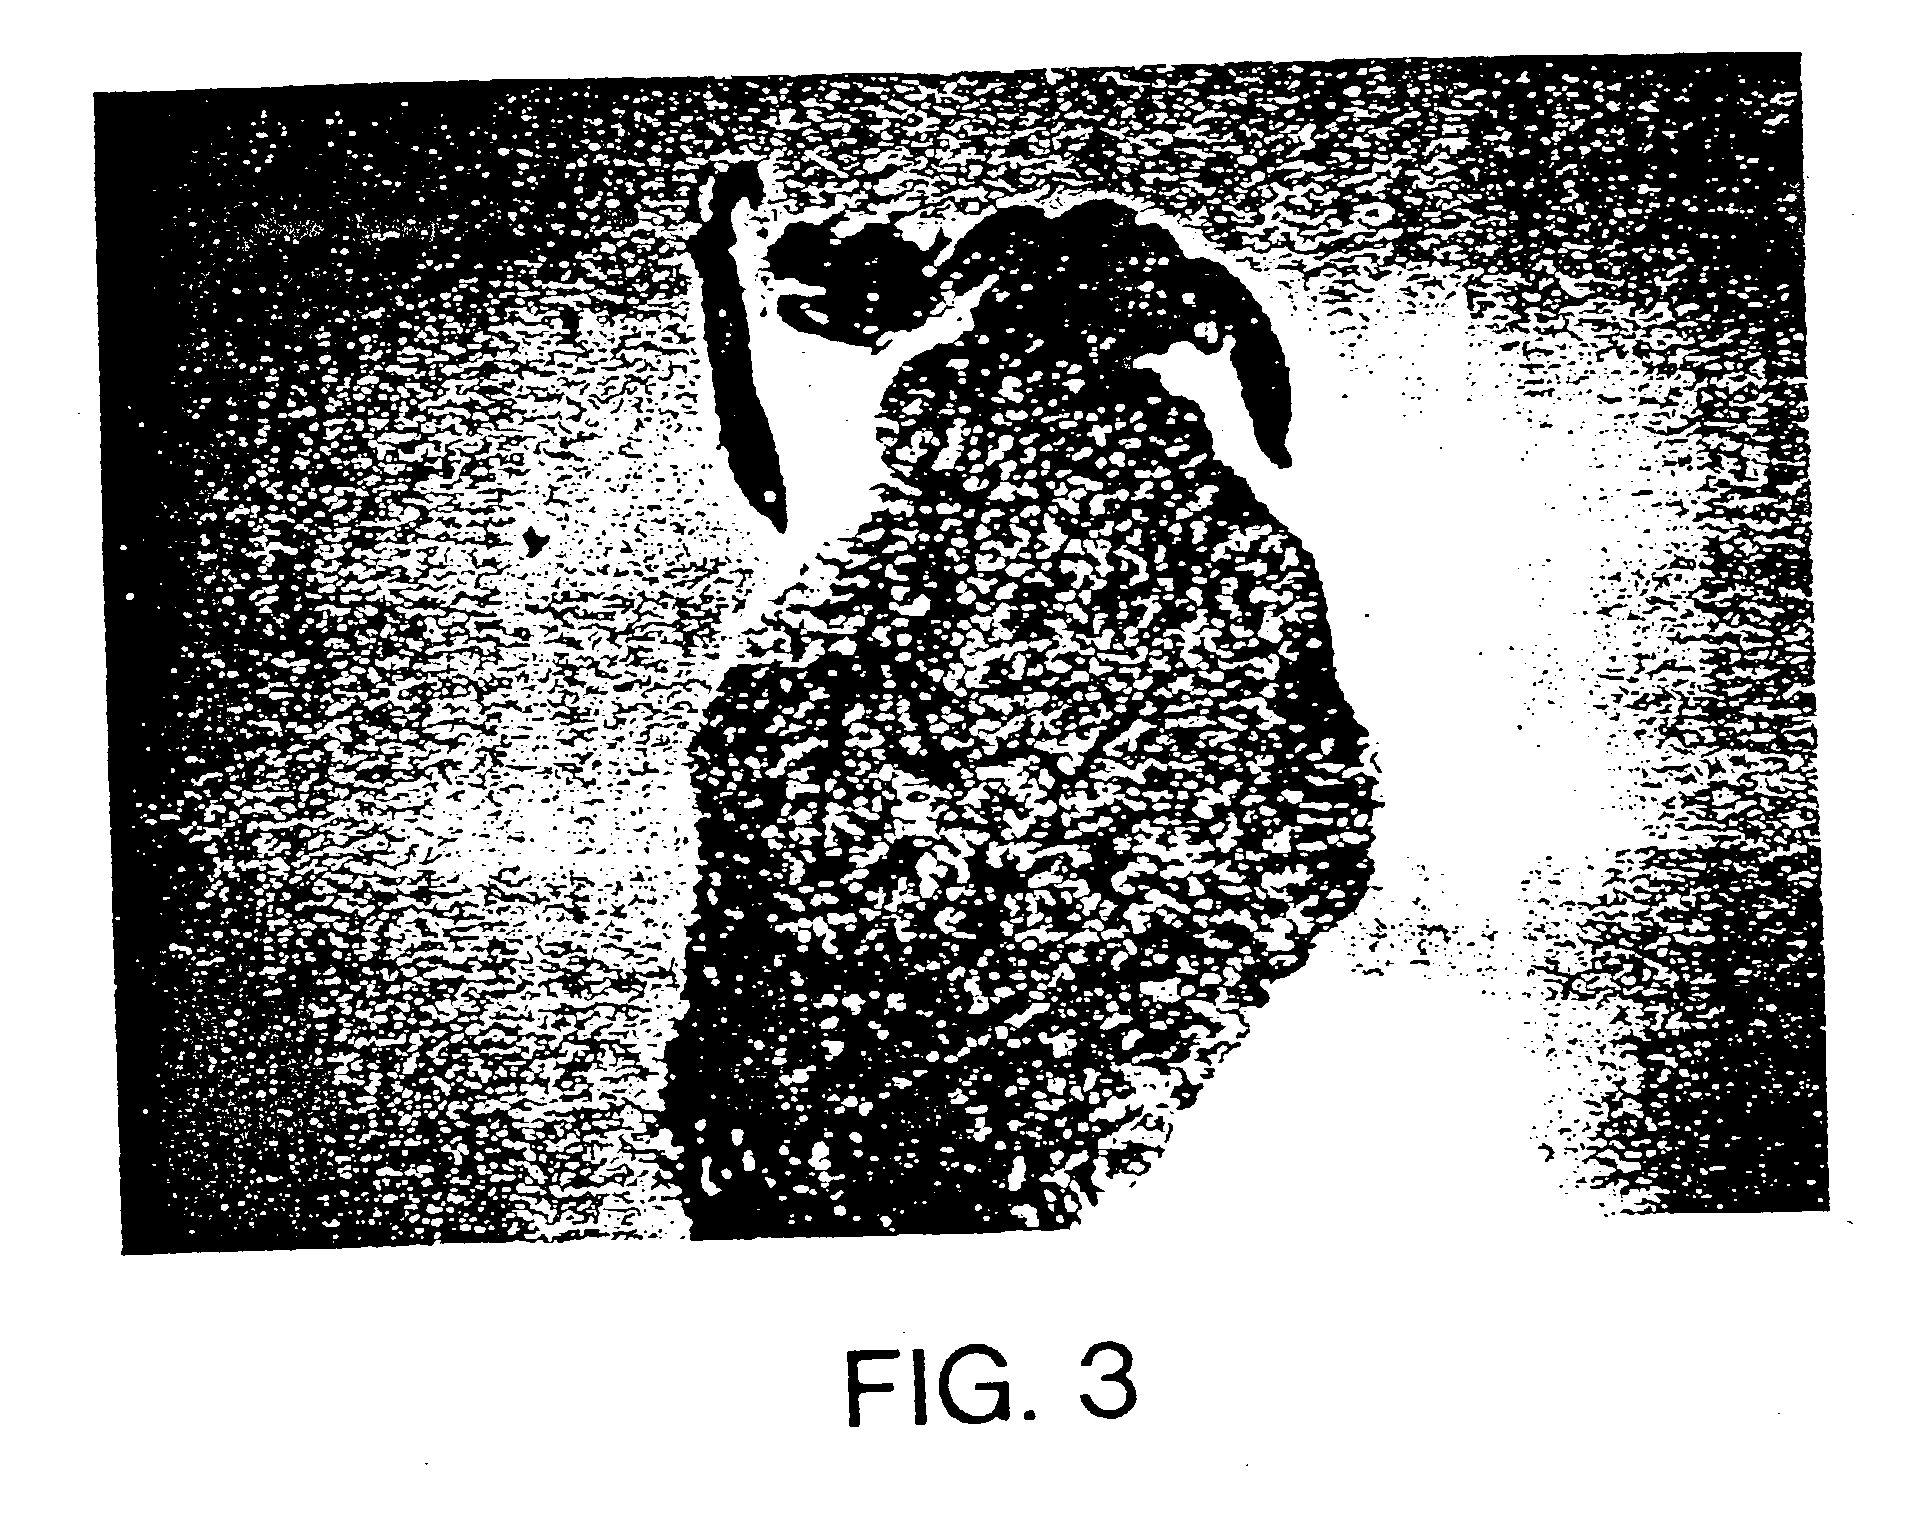 Gene transfer for treating a connective tissue of a mammalian host